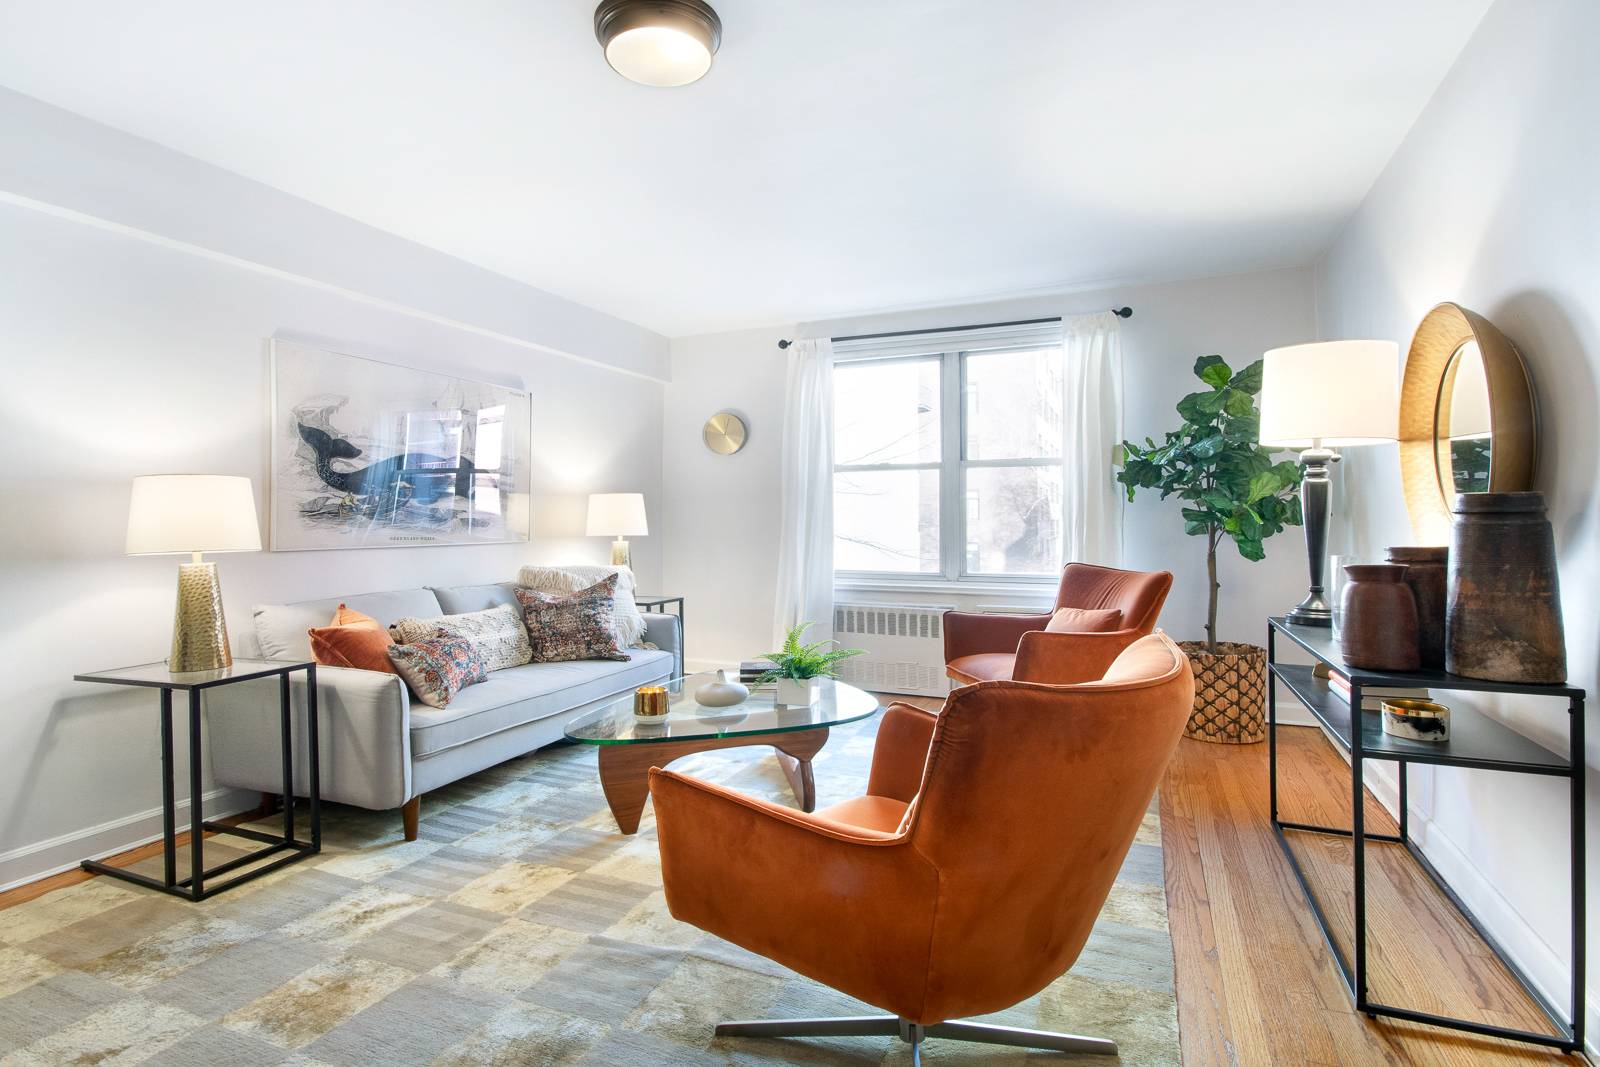 Move right into this renovated and turn key, Greenwich Village one bedroom on Bleecker Street.